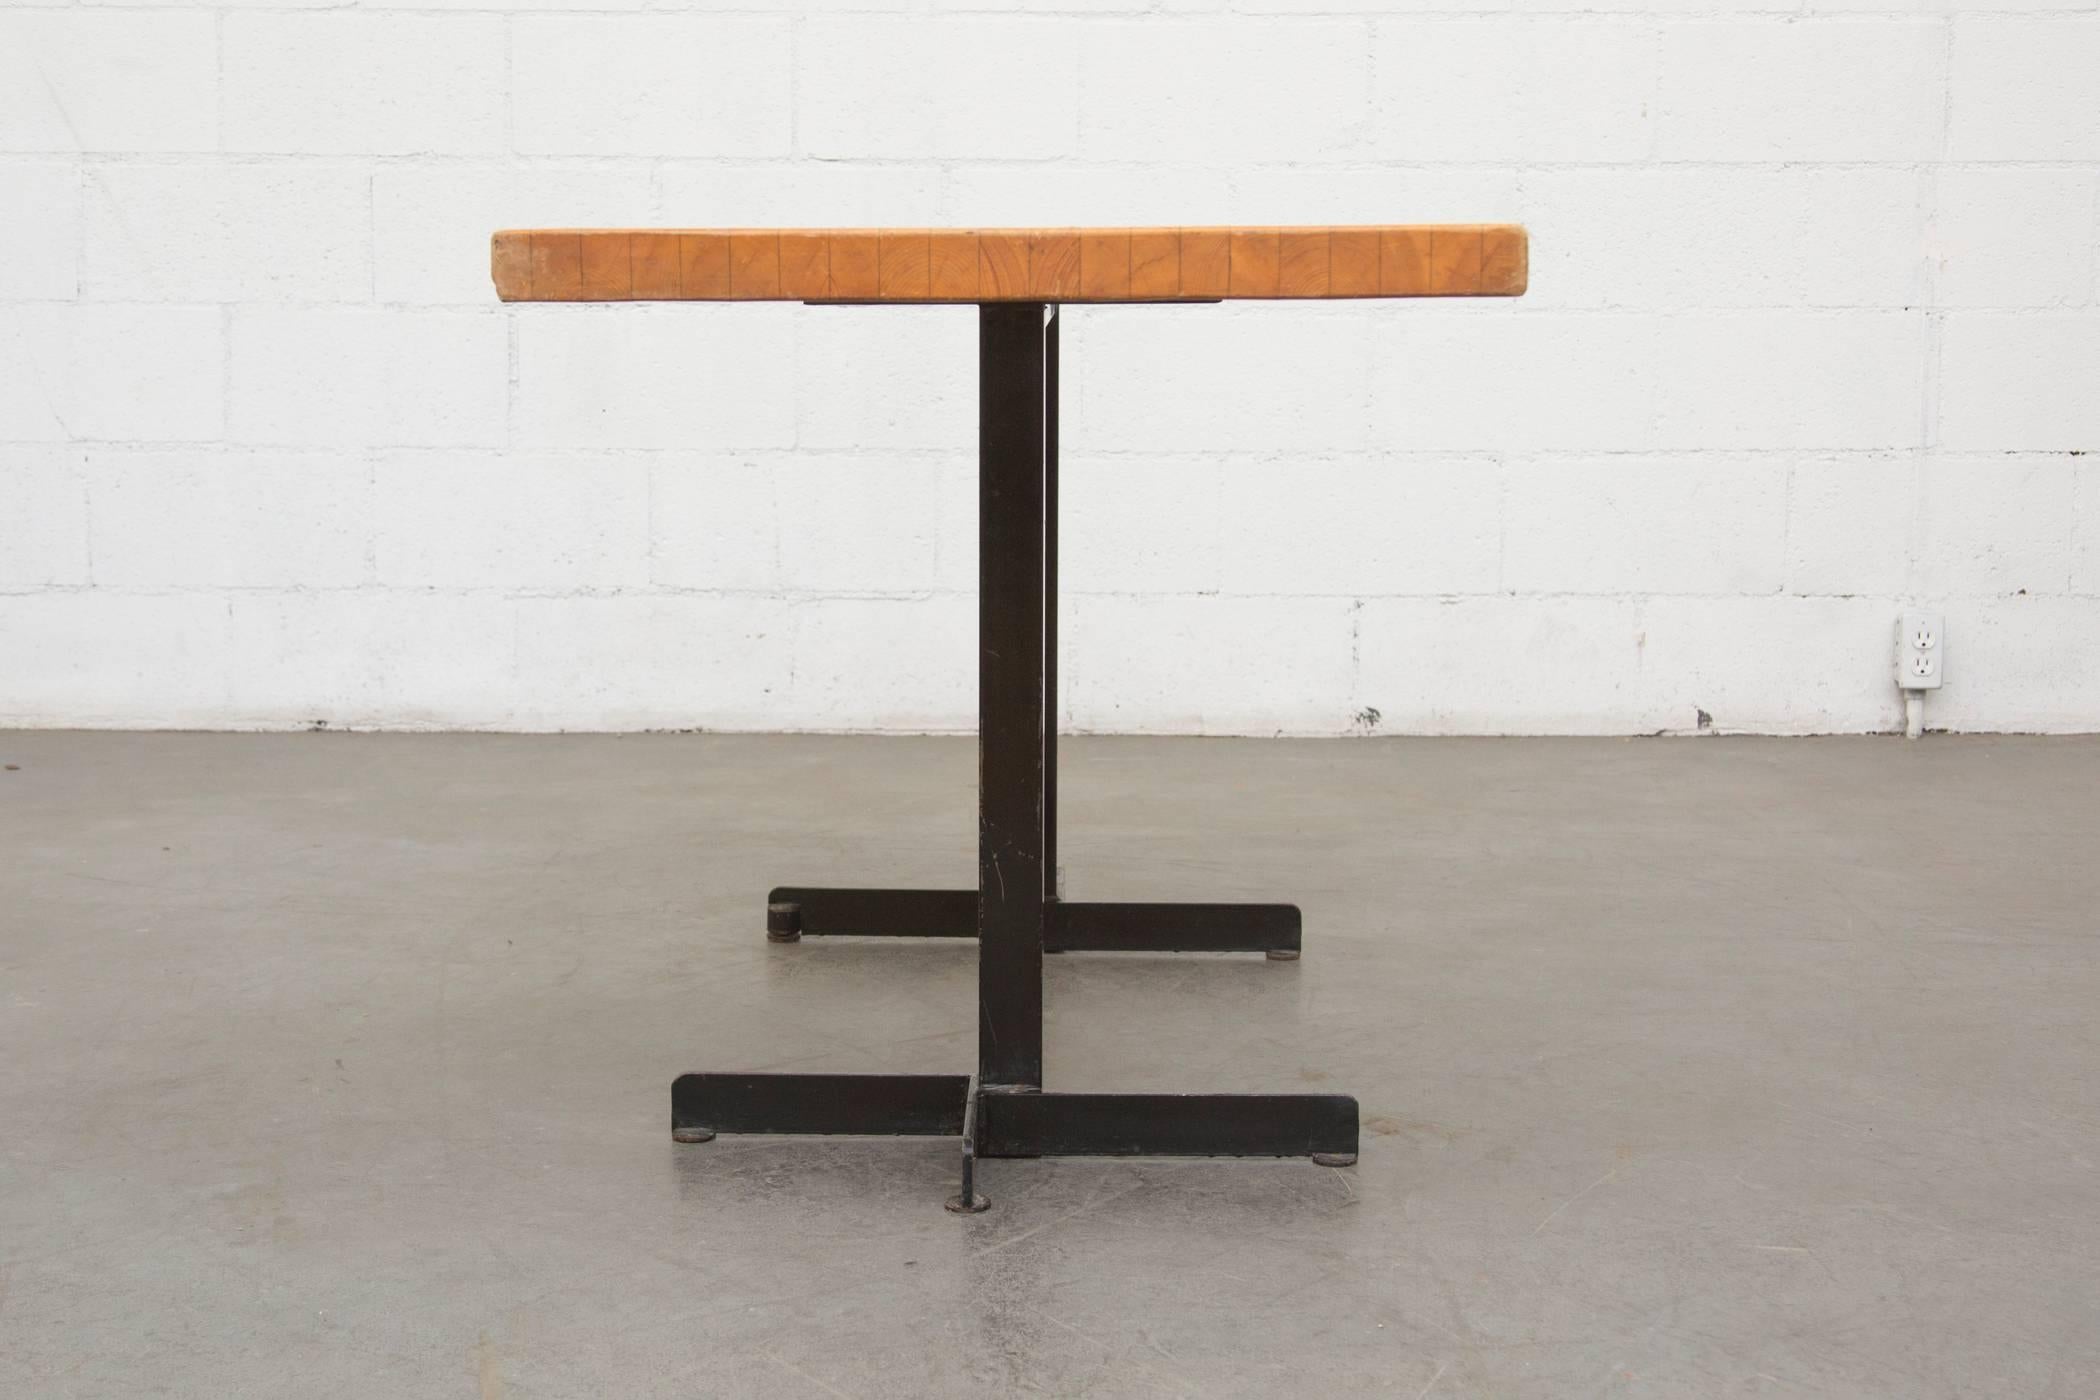 Solid pine dining table by Charlotte Perriand for Les Arcs Ski Resort, France. Black enameled metal geometric base. In original condition with visible wear to corners and edges of table top and wear to enamel on frame consistent with age and use.